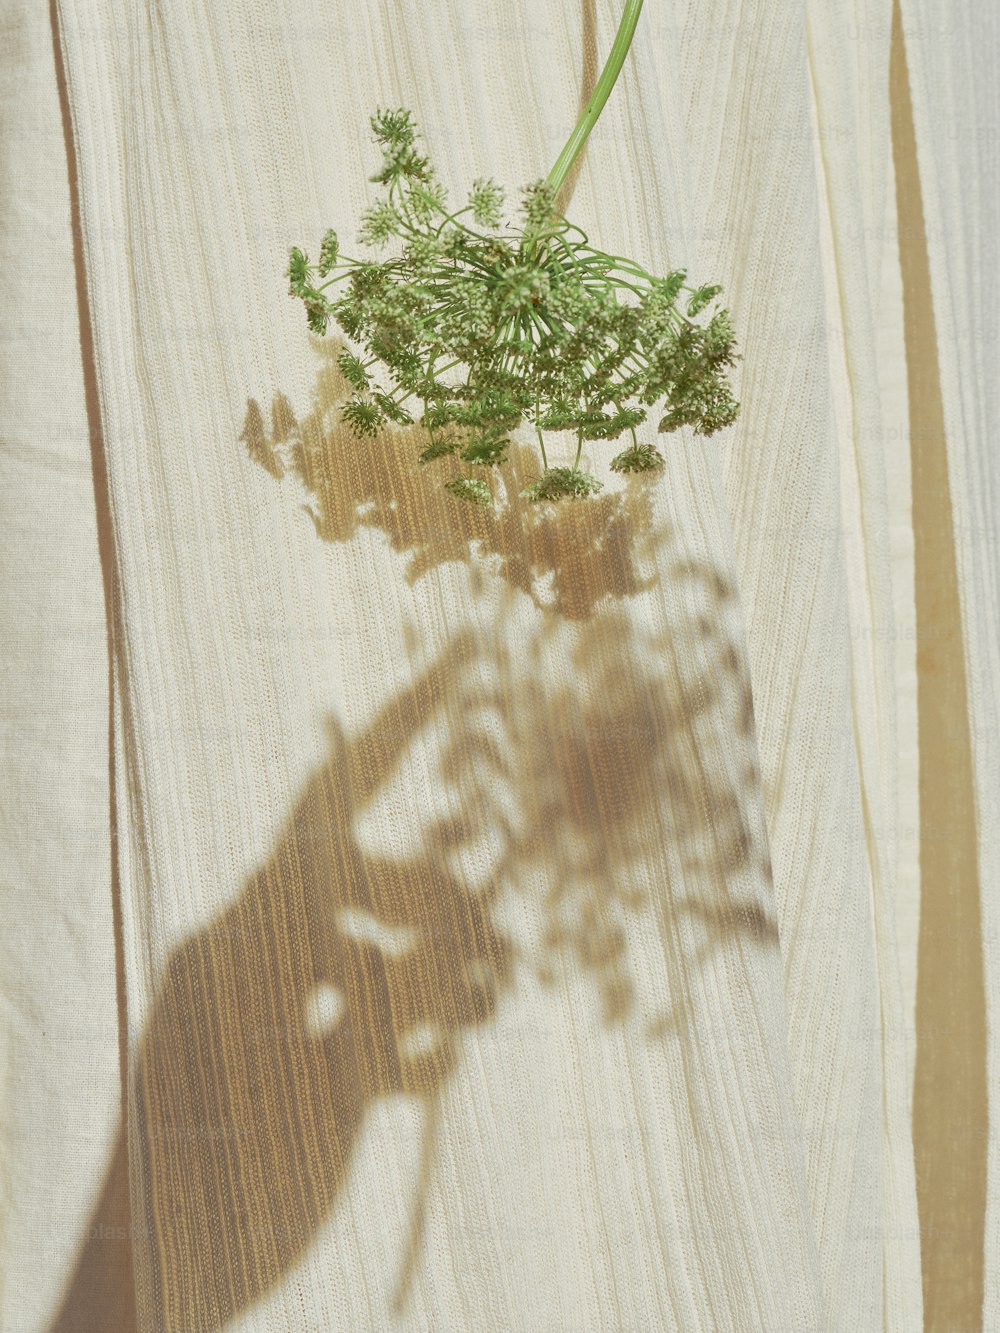 a shadow of a plant on a wooden surface